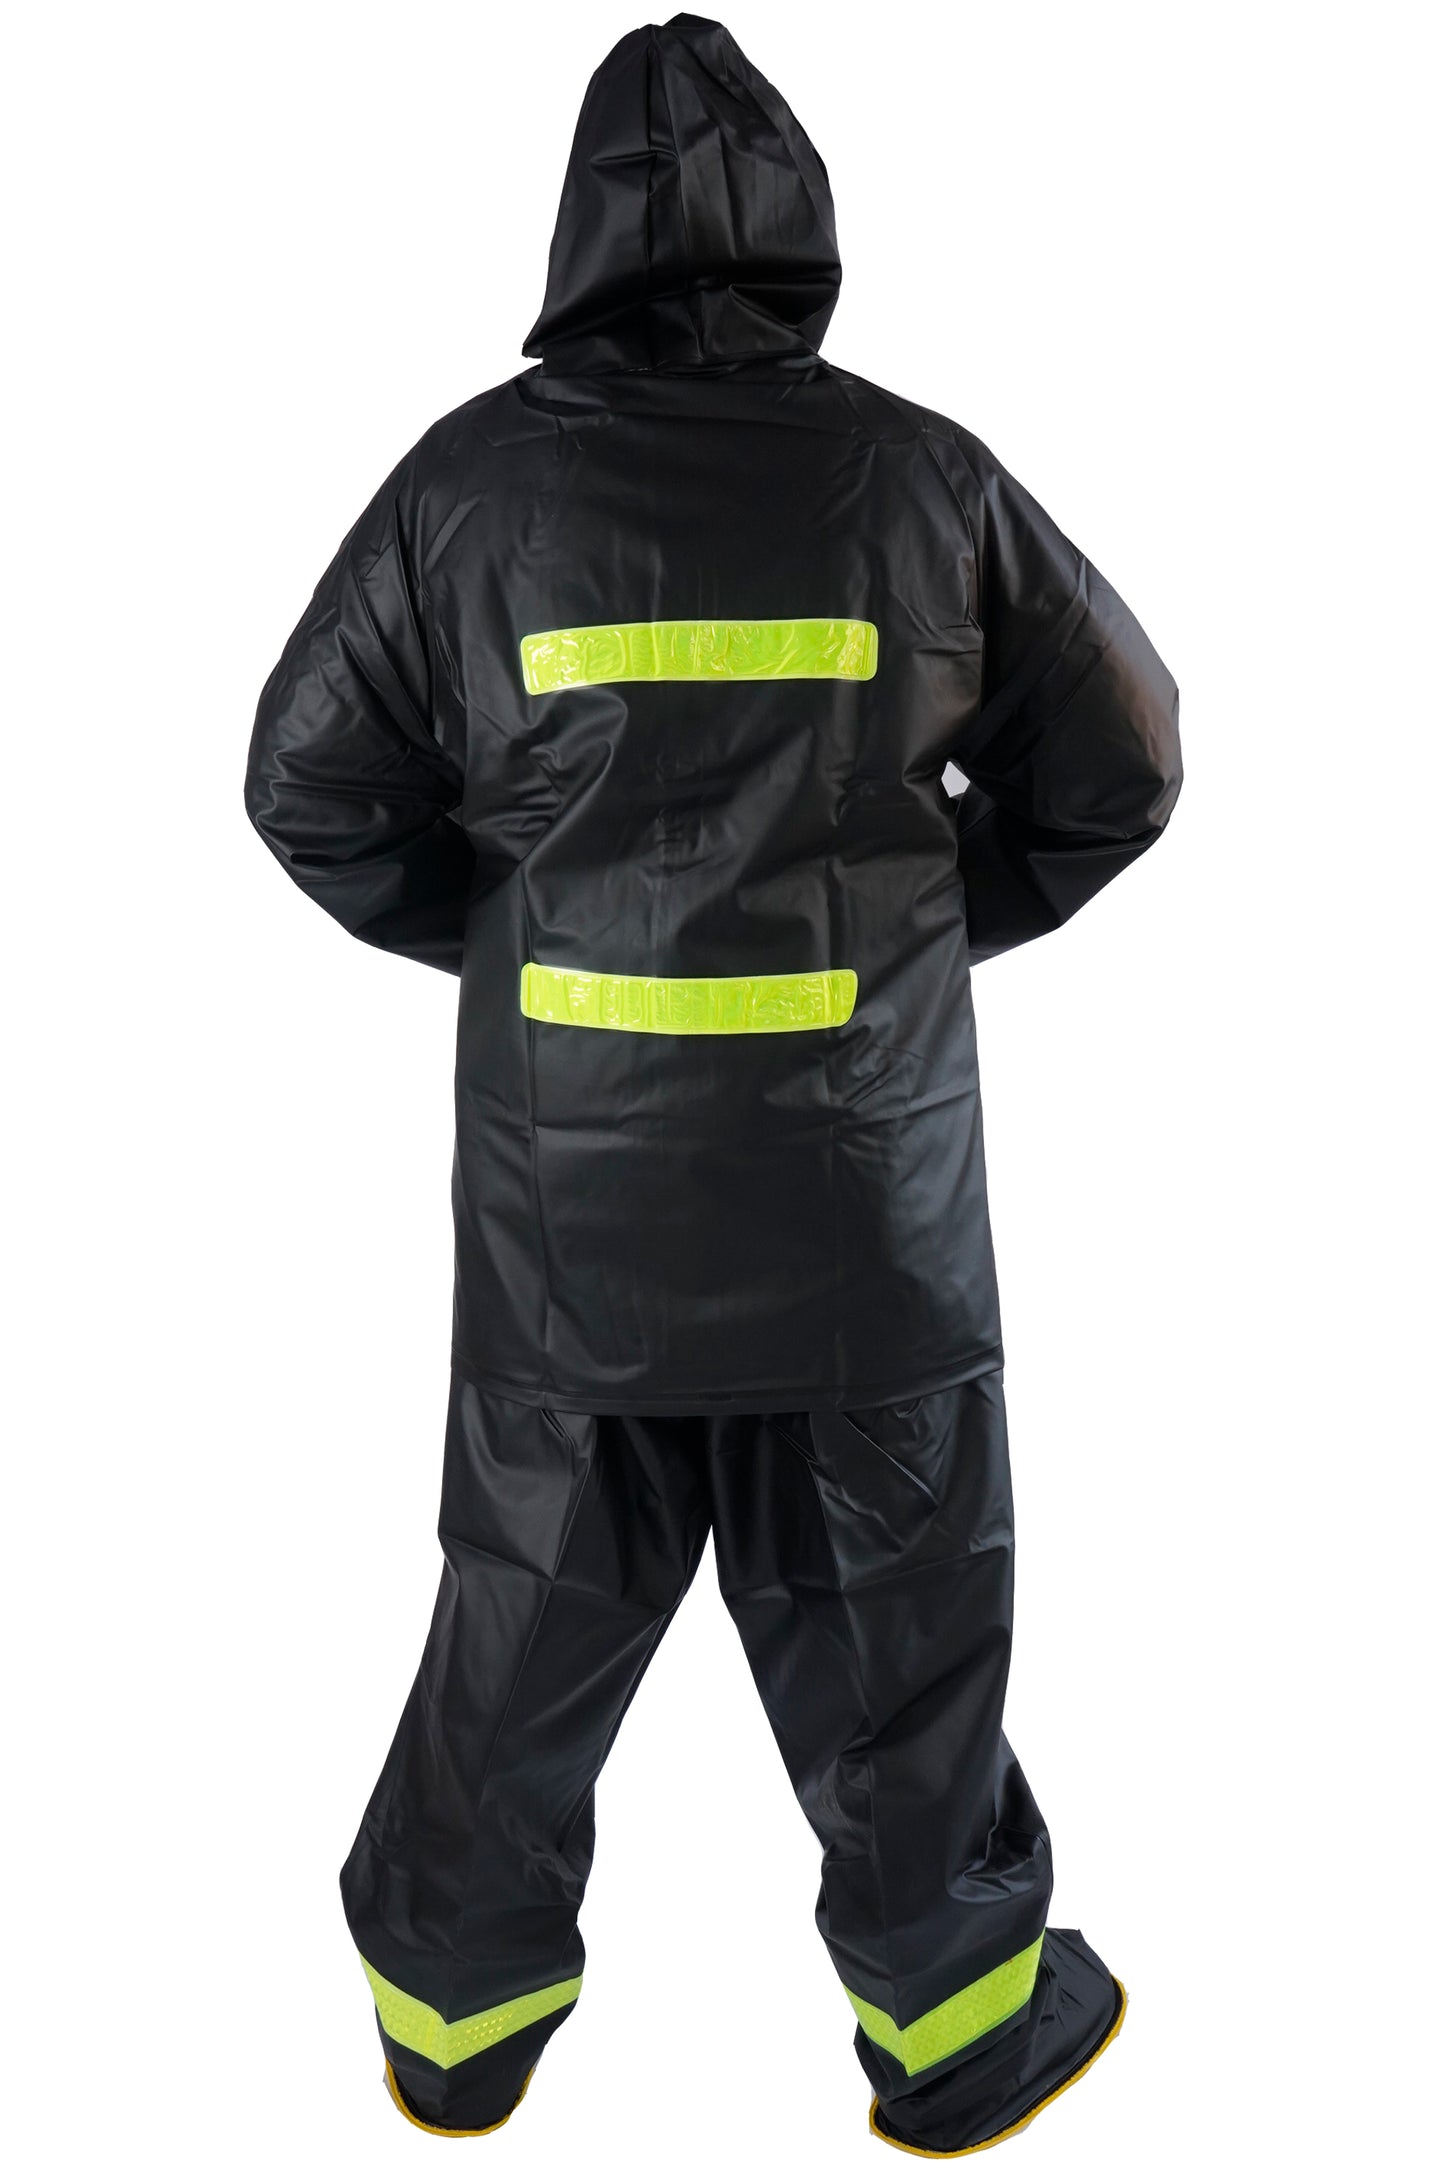 IMPERMEABLE REFLECTIVO